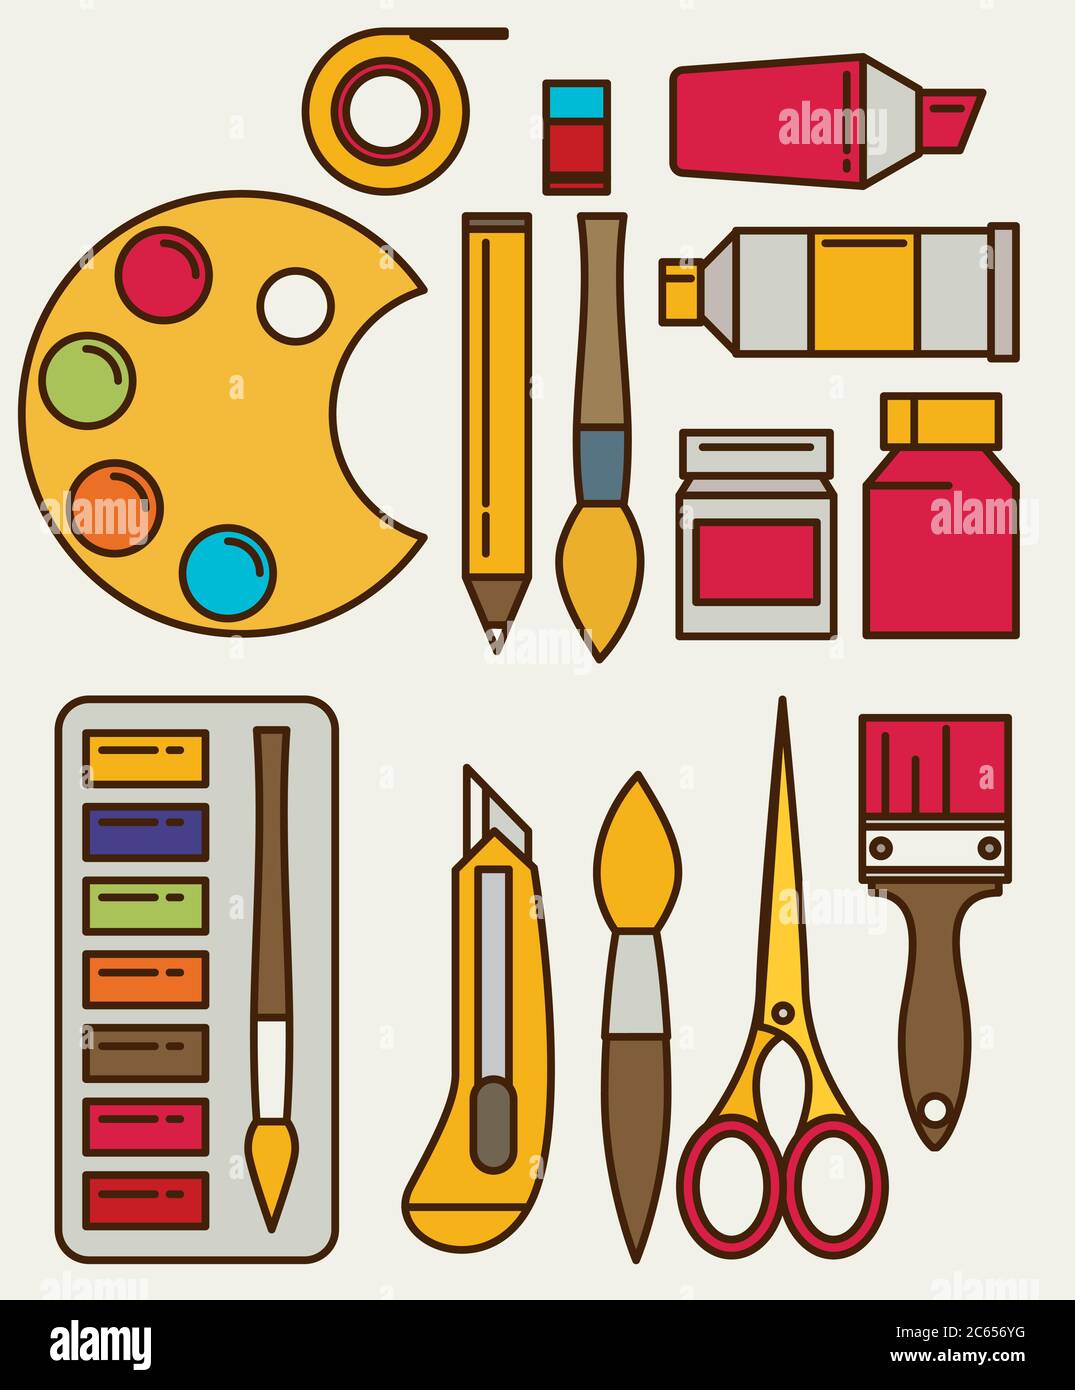 https://c8.alamy.com/comp/2C656YG/colored-flat-design-vector-illustration-icons-set-of-art-supplies-art-instruments-for-painting-drawing-sketching-isolated-on-bright-stylish-backgro-2C656YG.jpg